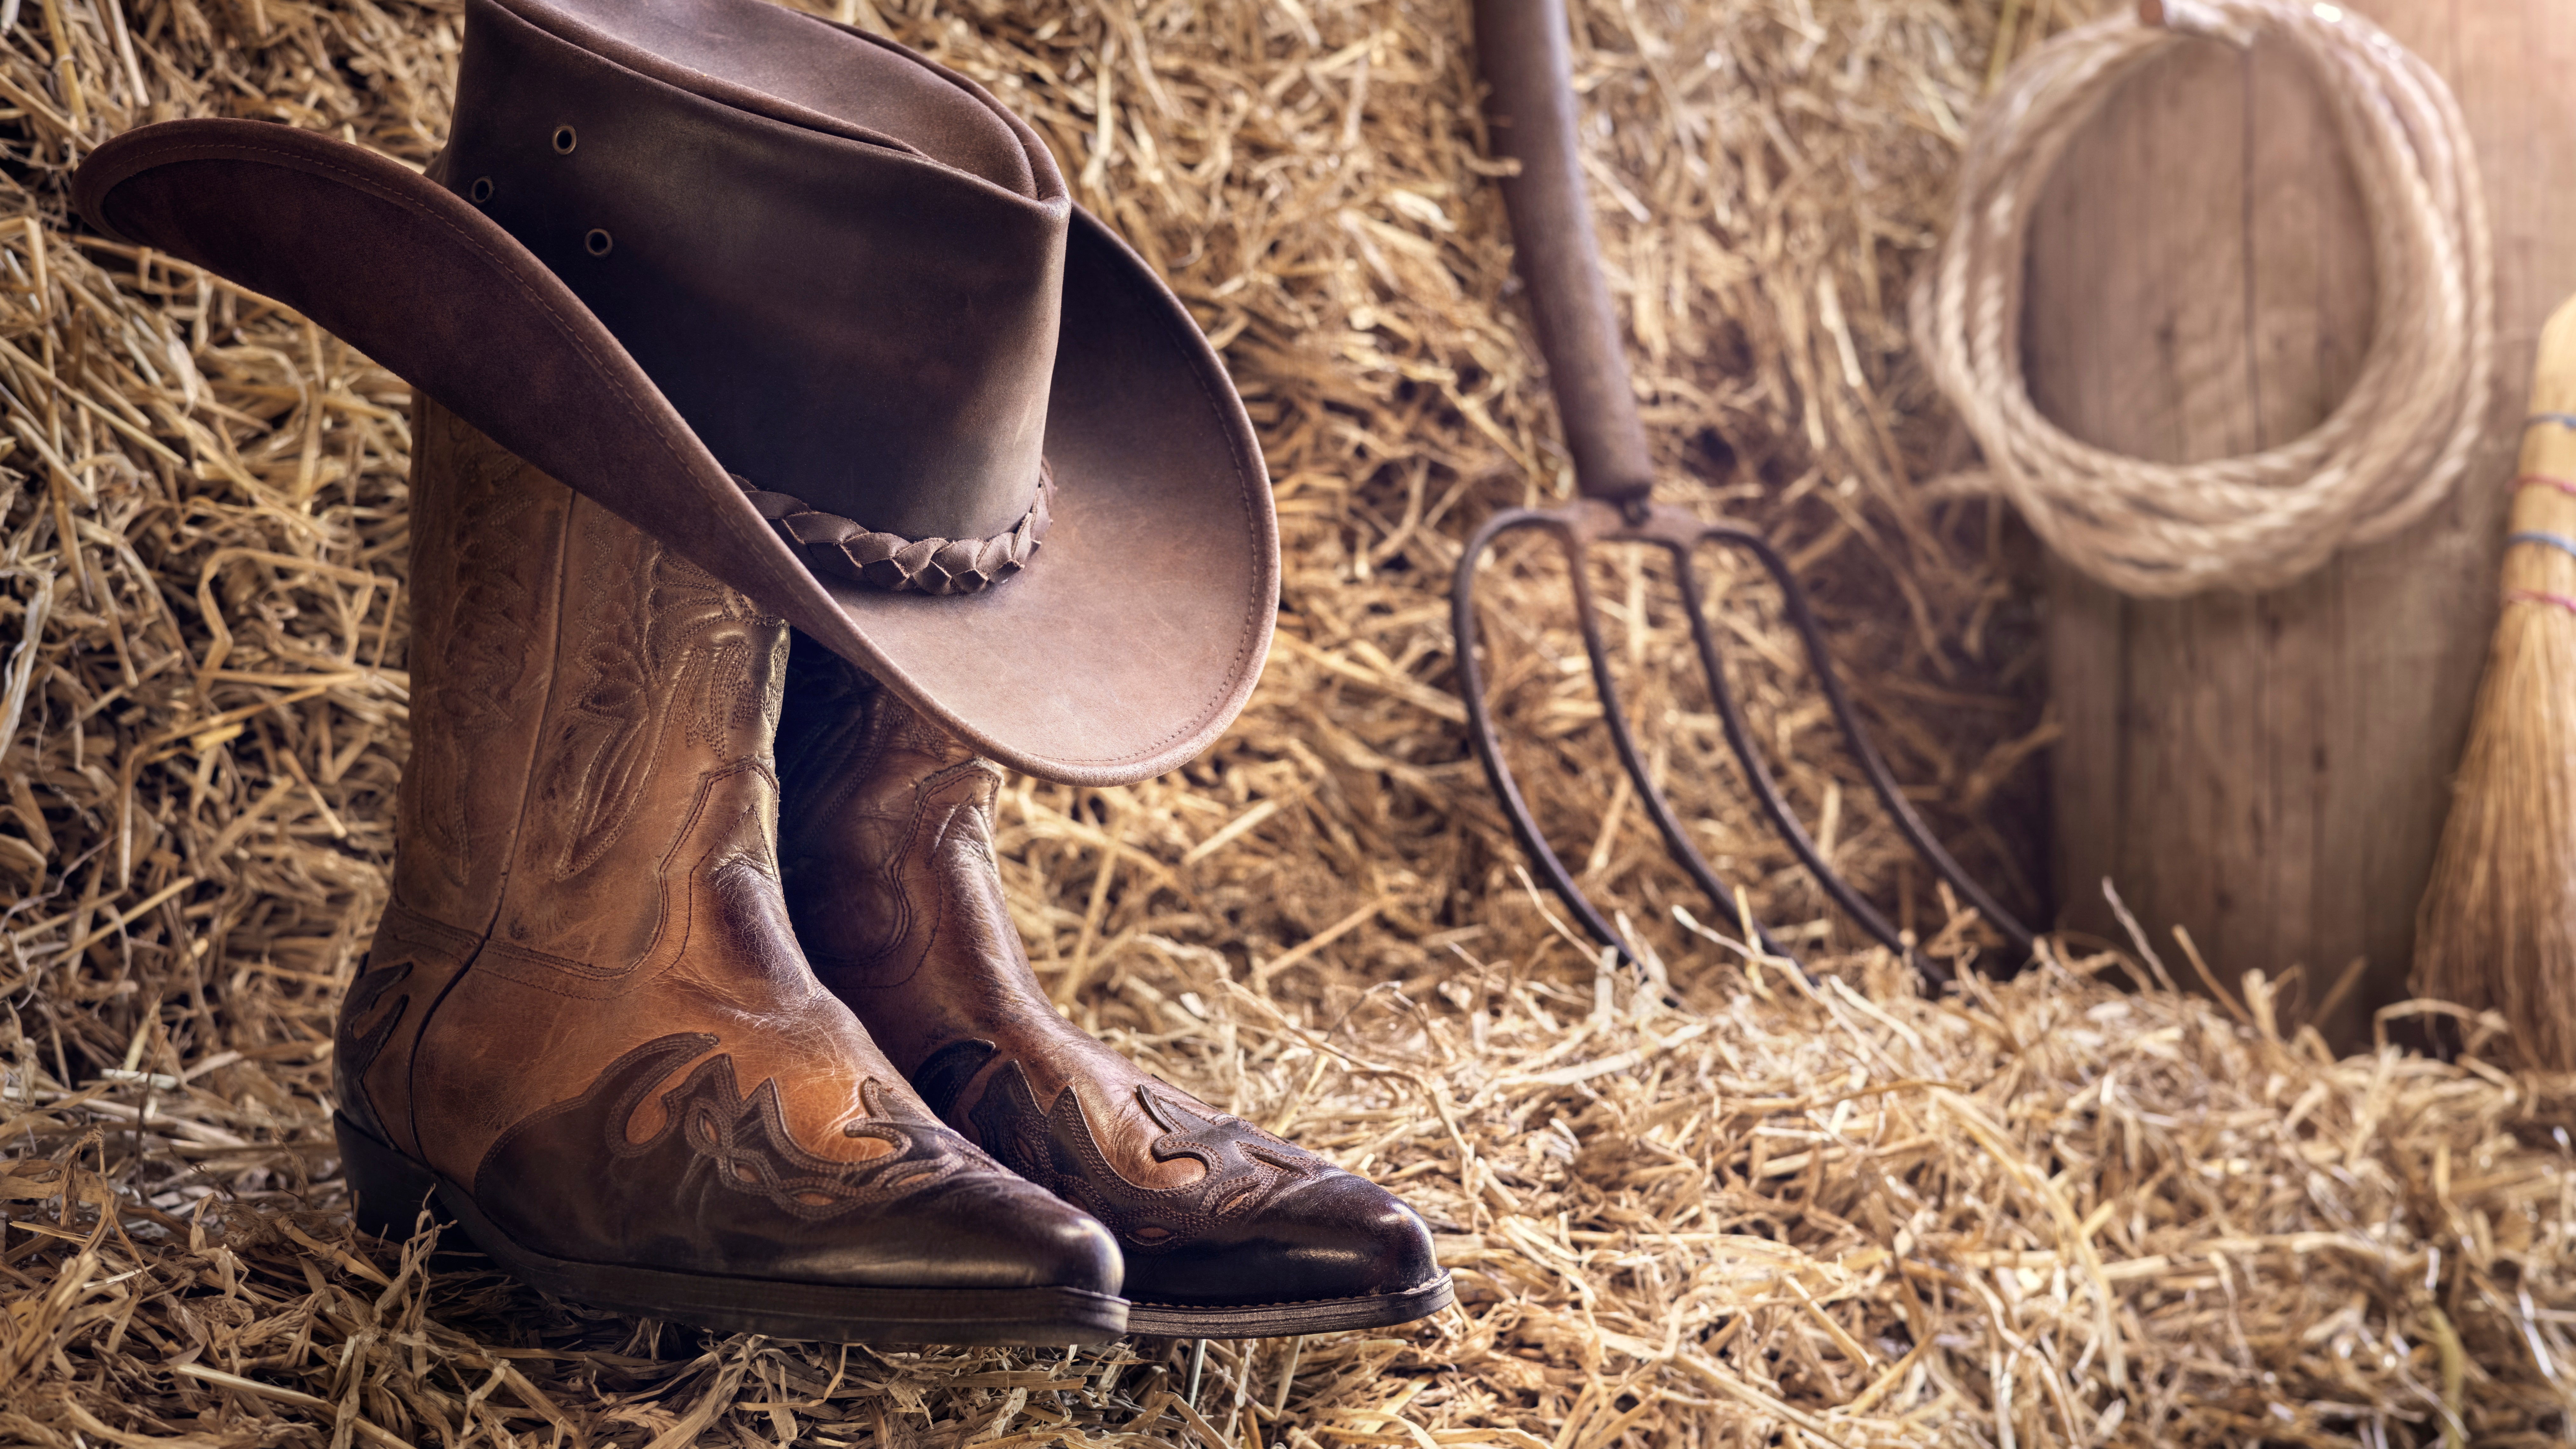 Boot Barn: Steps Ahead Of The Competition (NYSE:BOOT) | Seeking Alpha